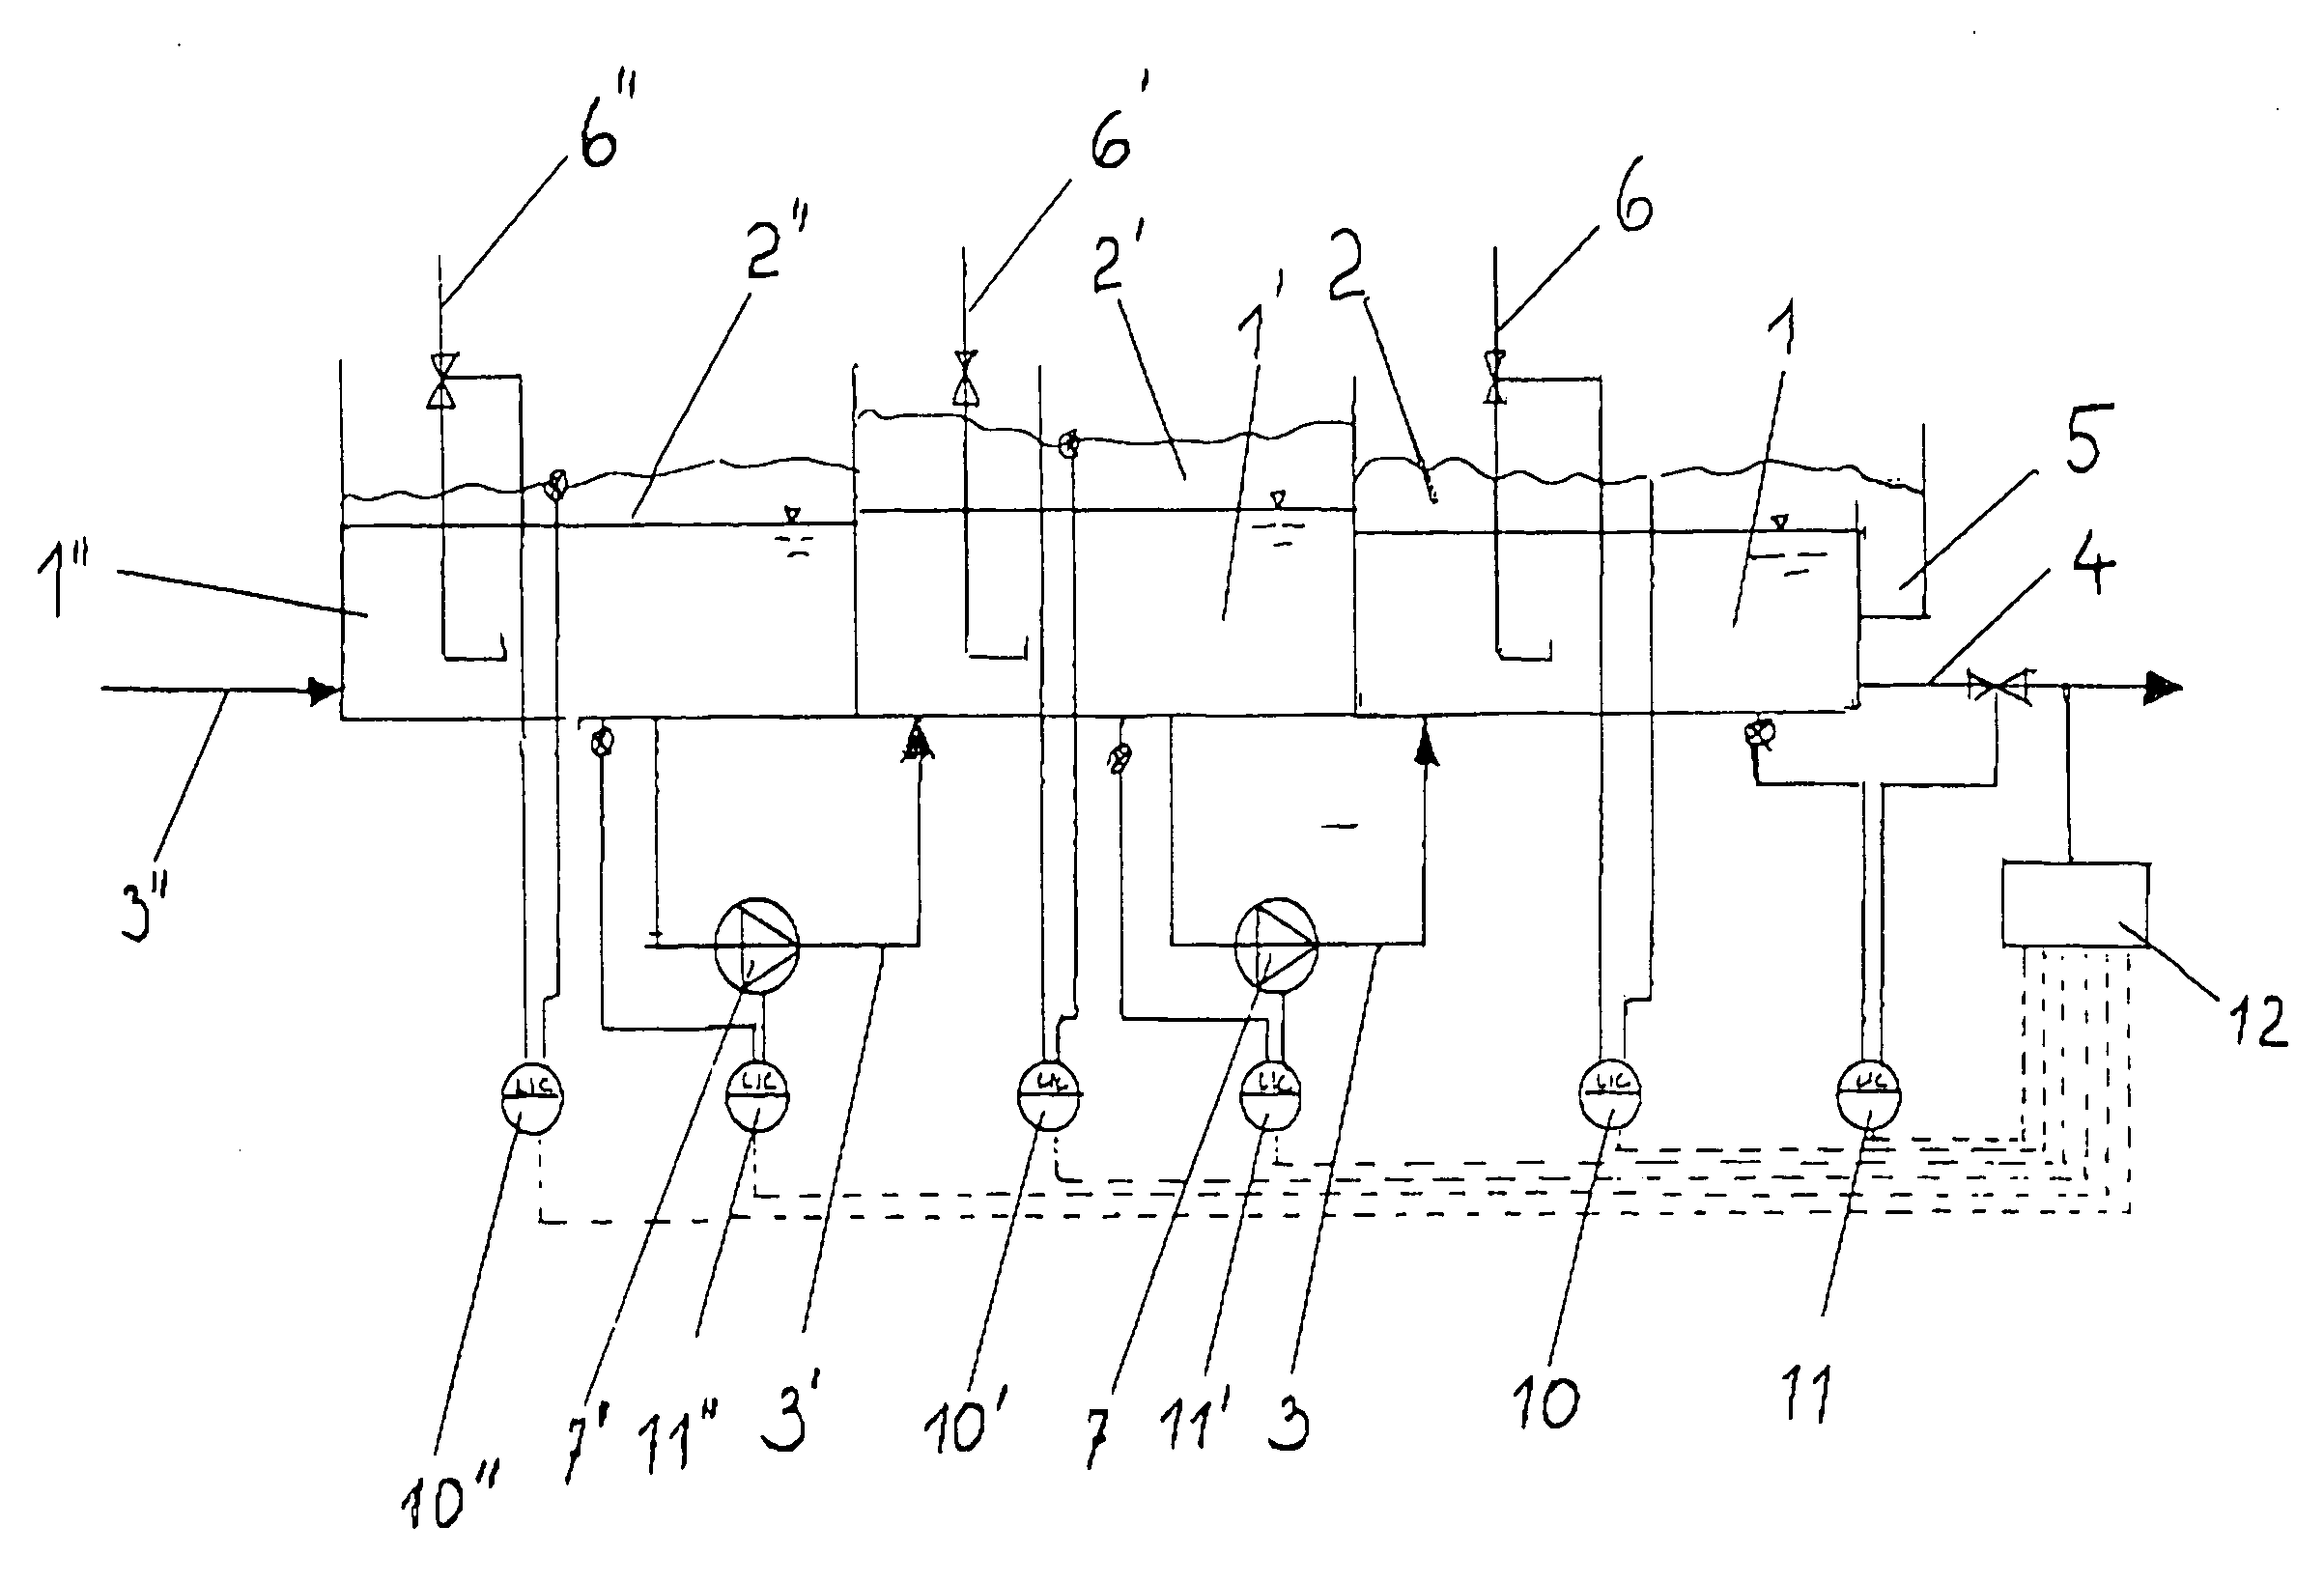 Process for controlling operation of a flotation cell